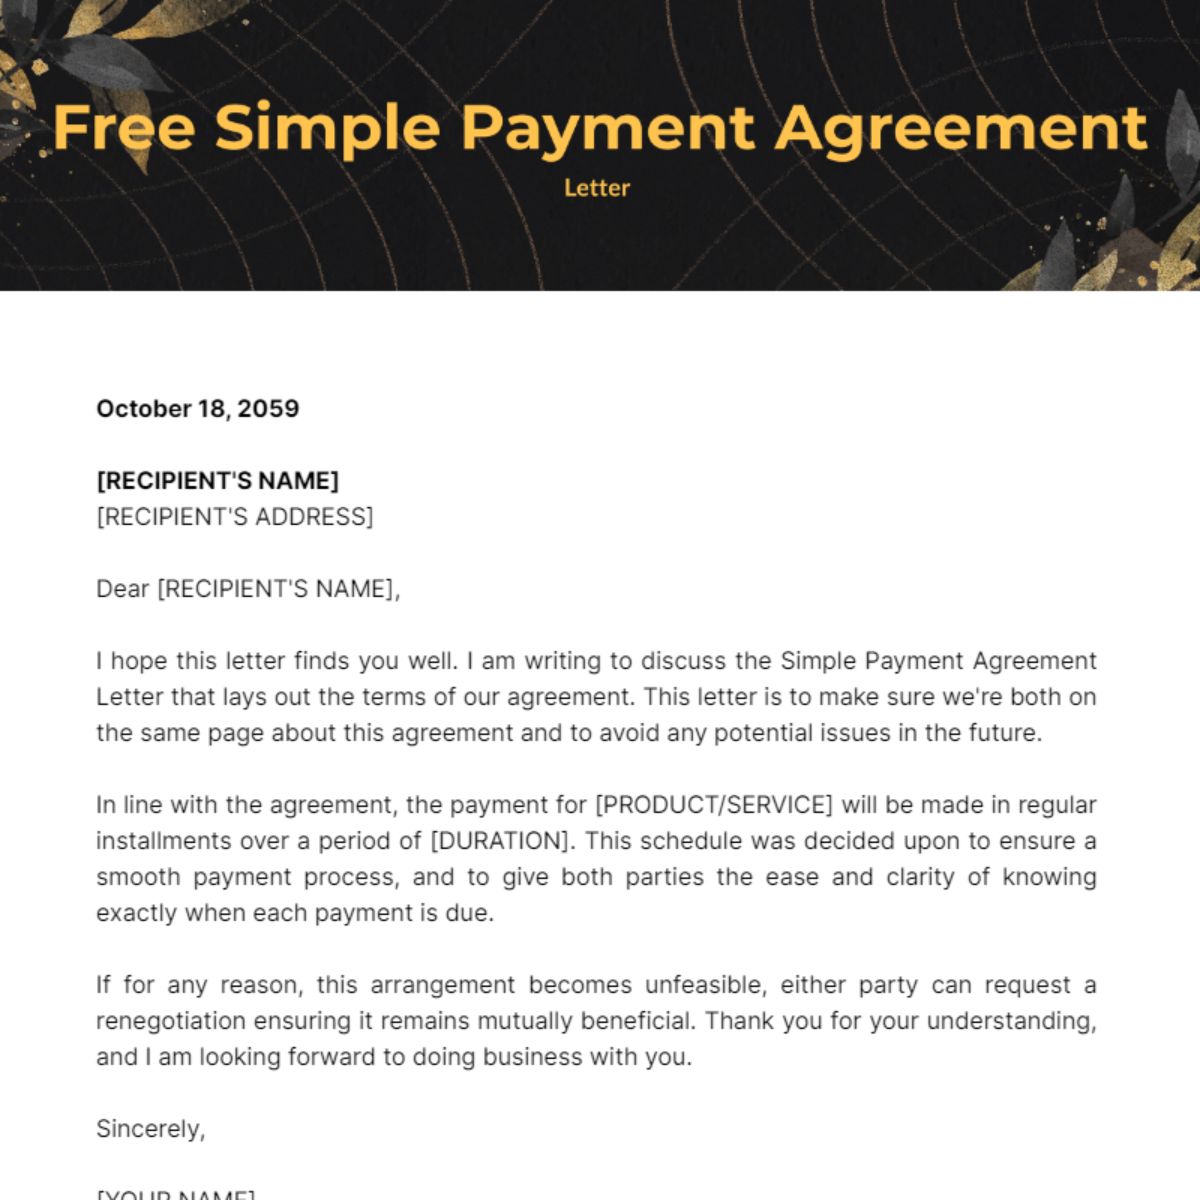 Simple Payment Agreement Letter Template